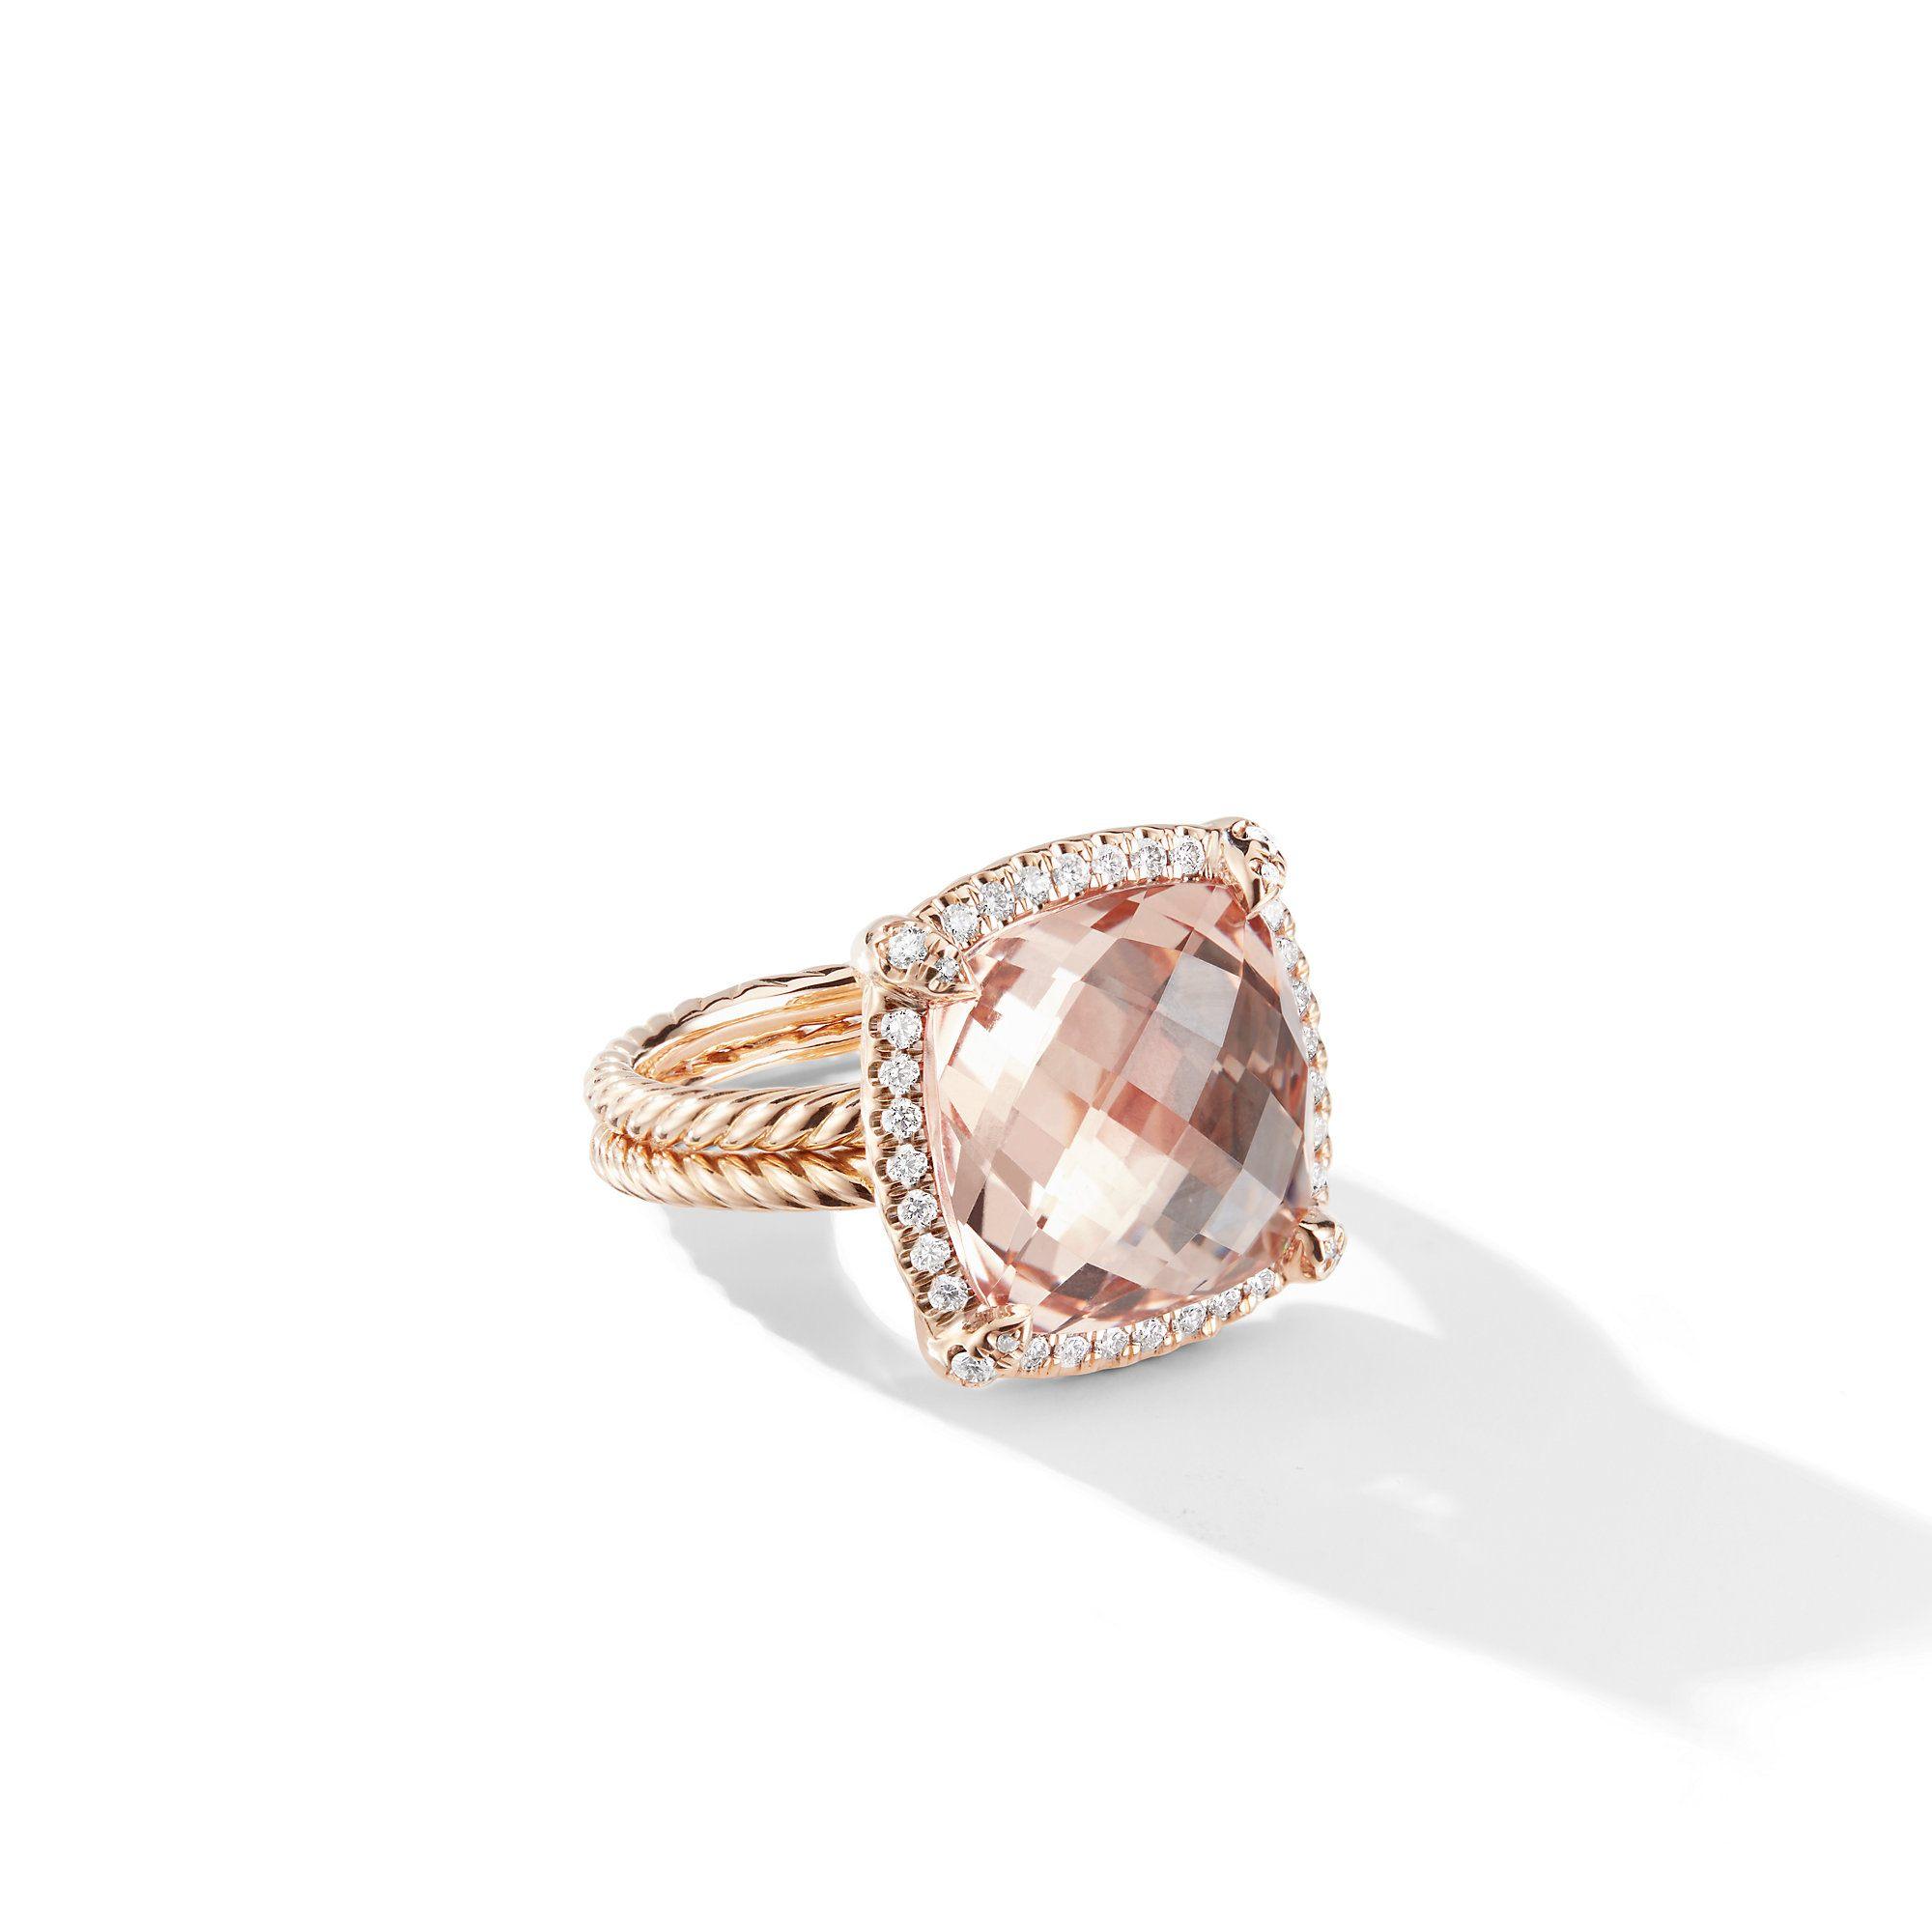 David Yurman Chatelaine Pave Bezel Ring in 18K Rose Gold with Morganite and Diamonds